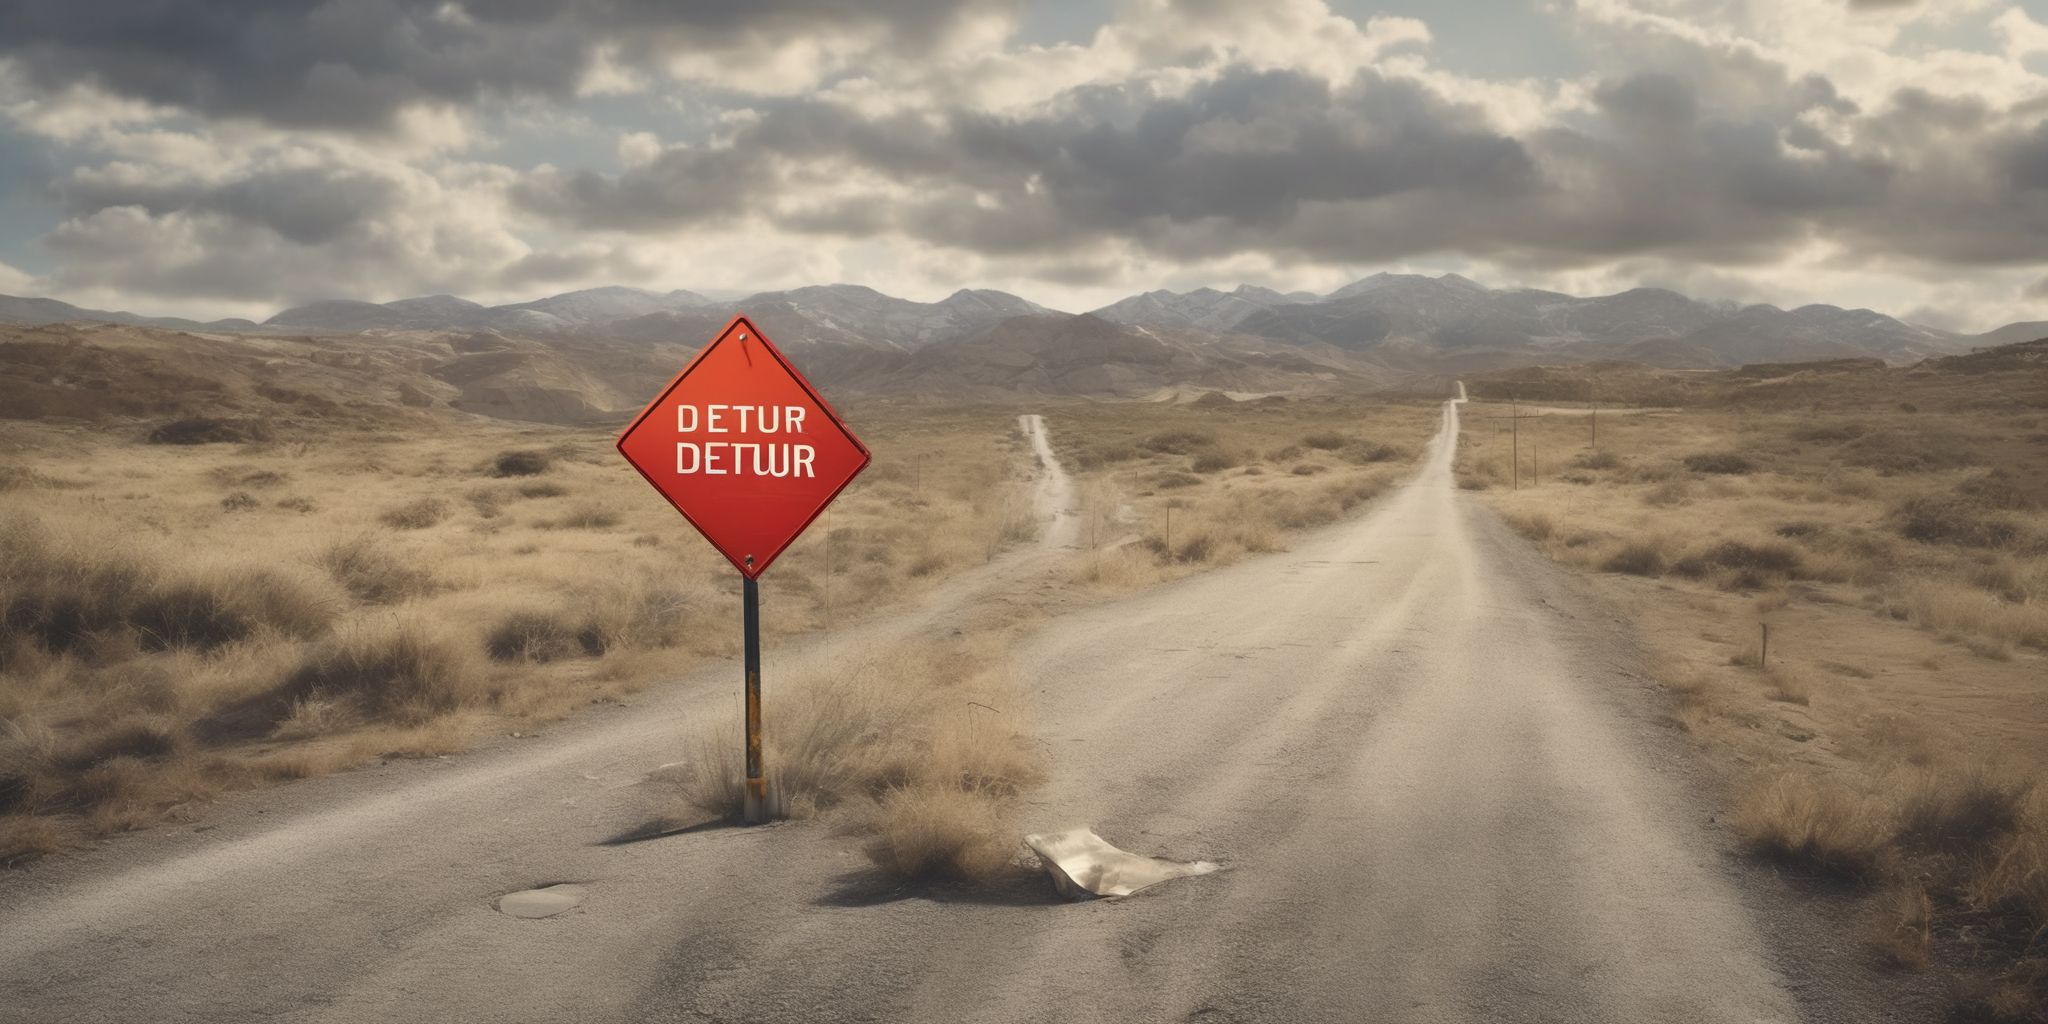 Detour sign  in realistic, photographic style